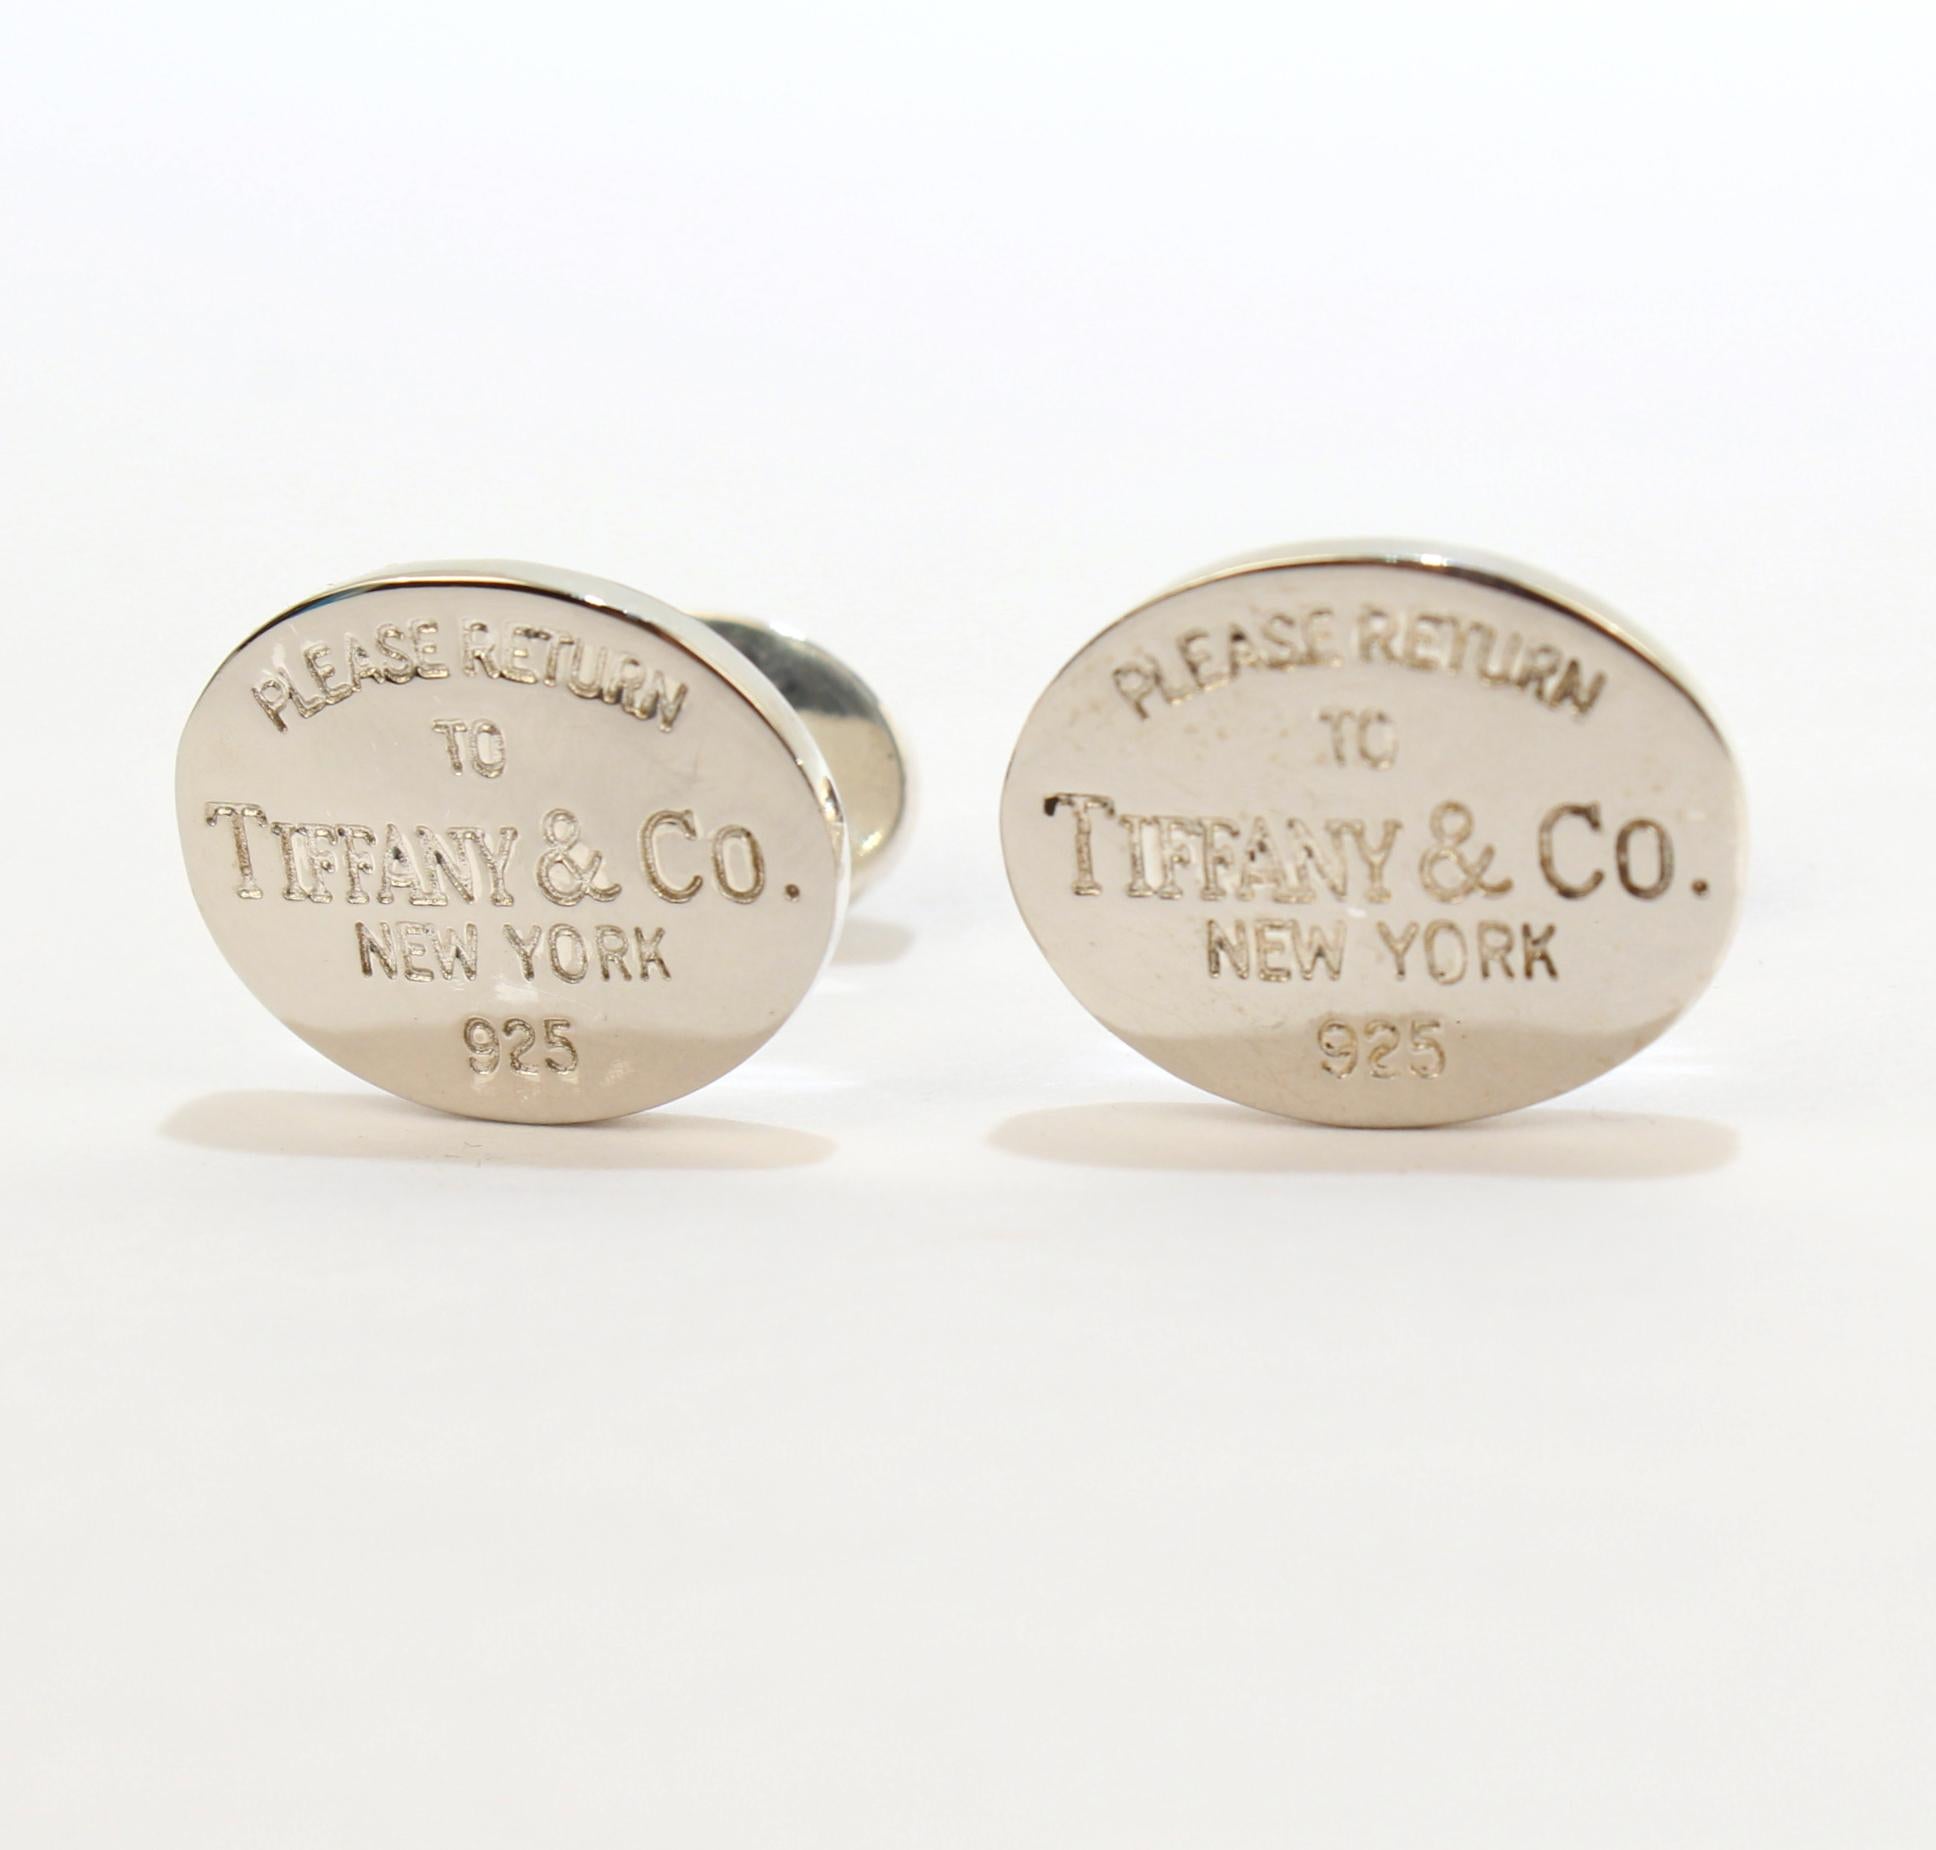 A fine pair of vintage Tiffany & Co. cufflinks.

Engraved with the iconic message: 